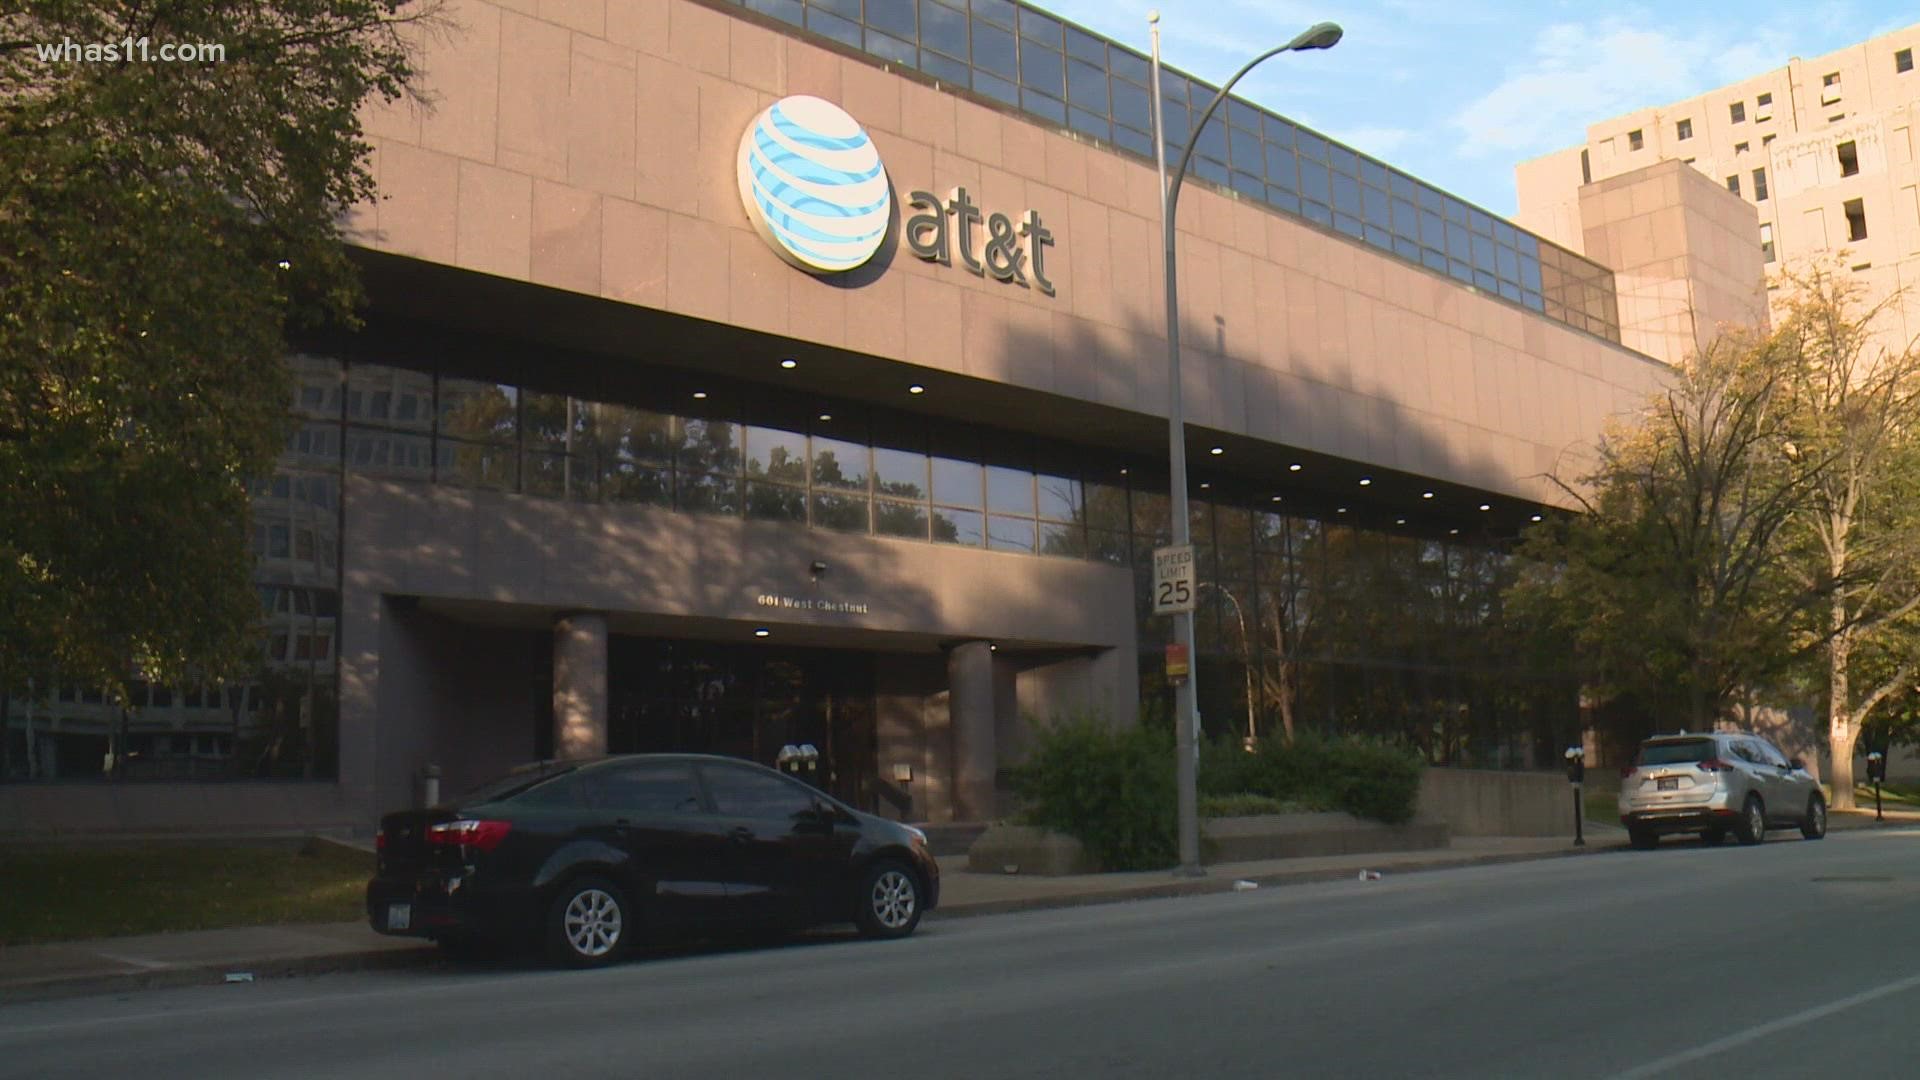 The city announced it has plans to buy the AT&T building downtown for a new municipal building.